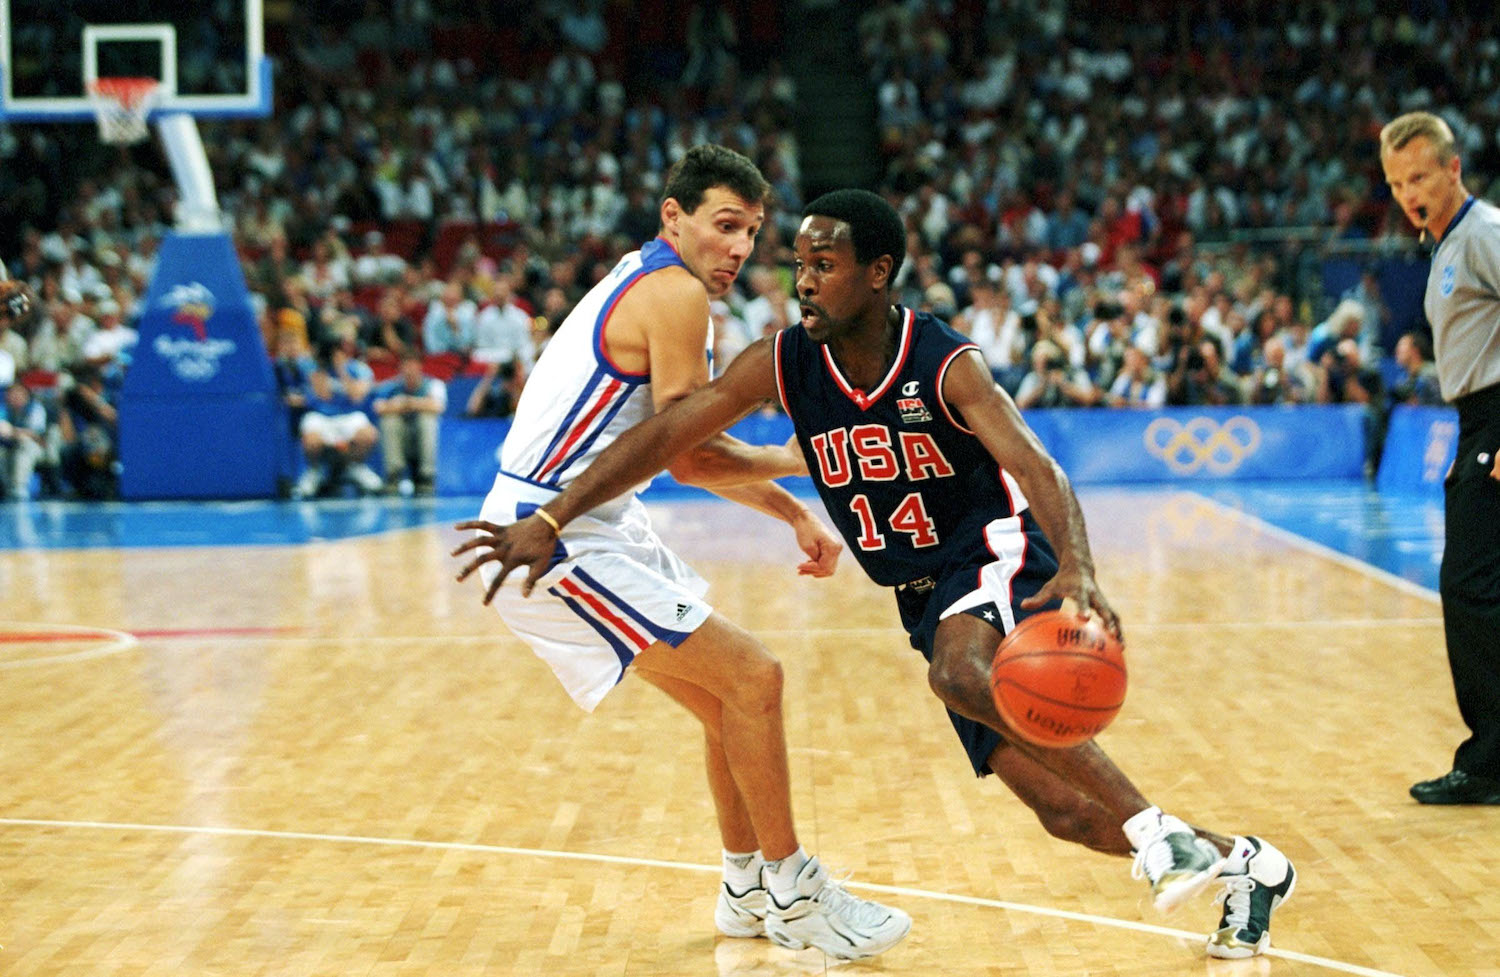 Gary Payton drives by a defender as a member of Team USA.